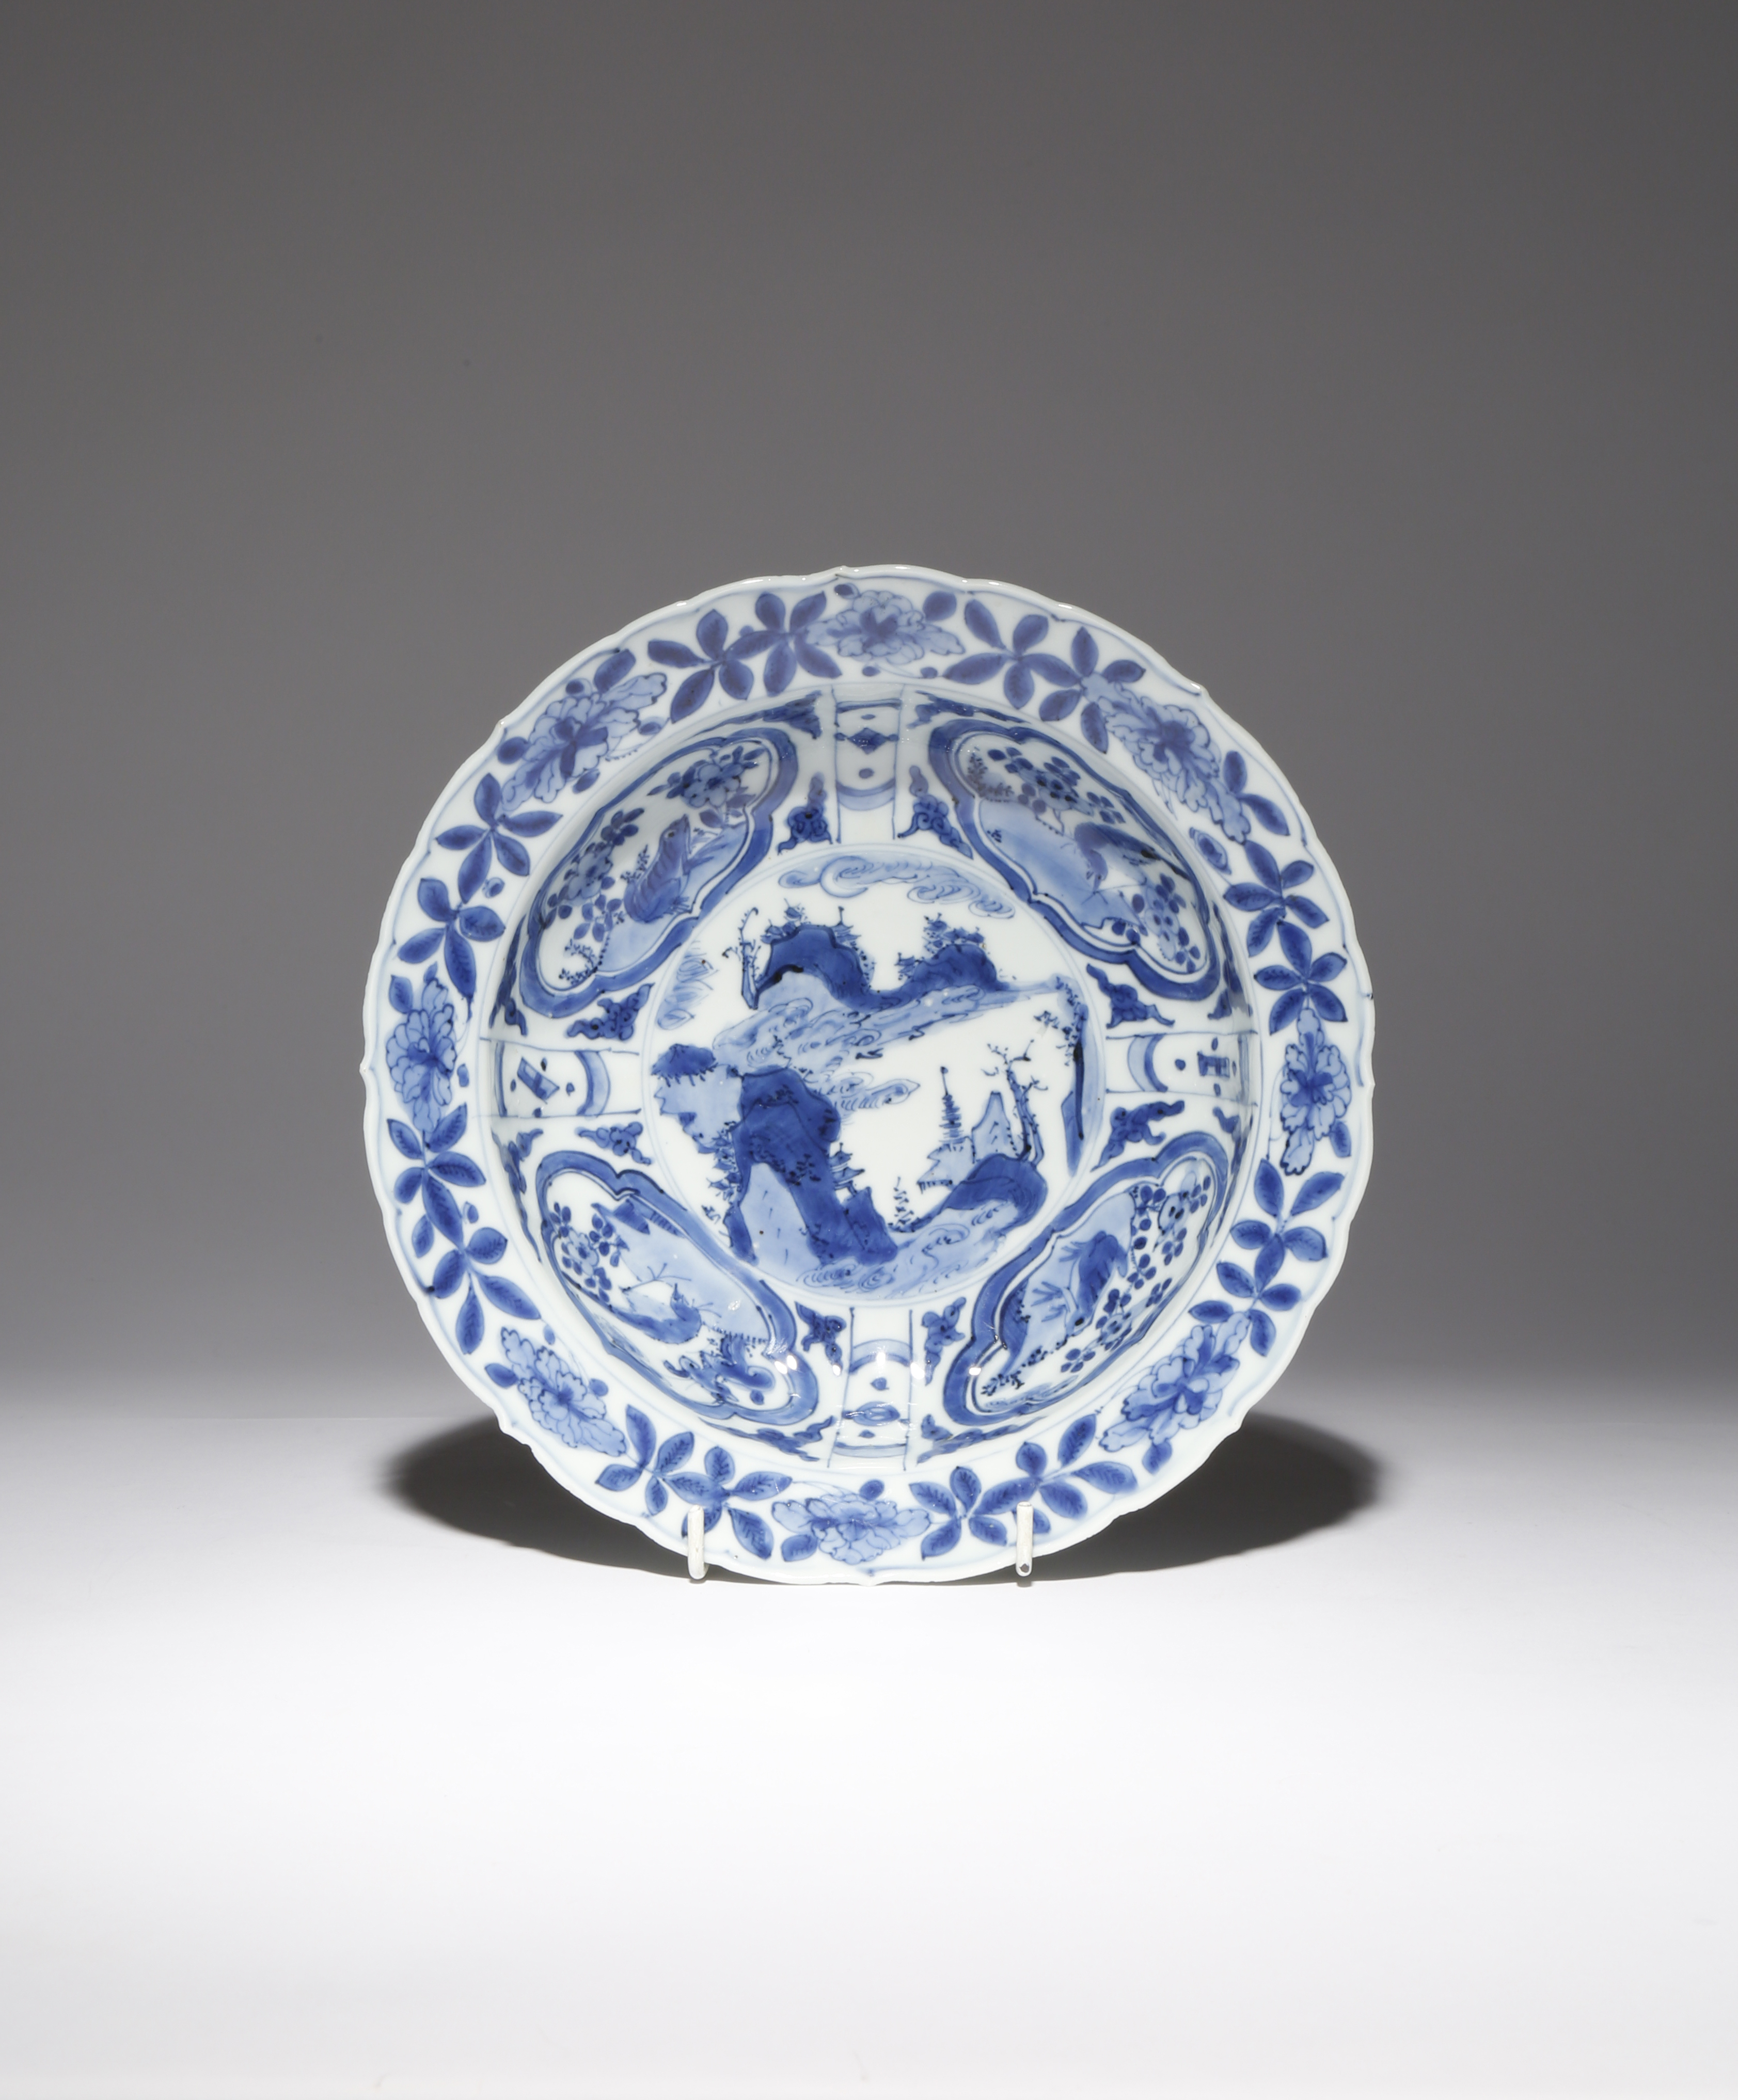 A CHINESE BLUE AND WHITE KRAAK PORCELAIN 'KLAPMUTS' BOWL WANLI 1573-1620 Painted to the centre